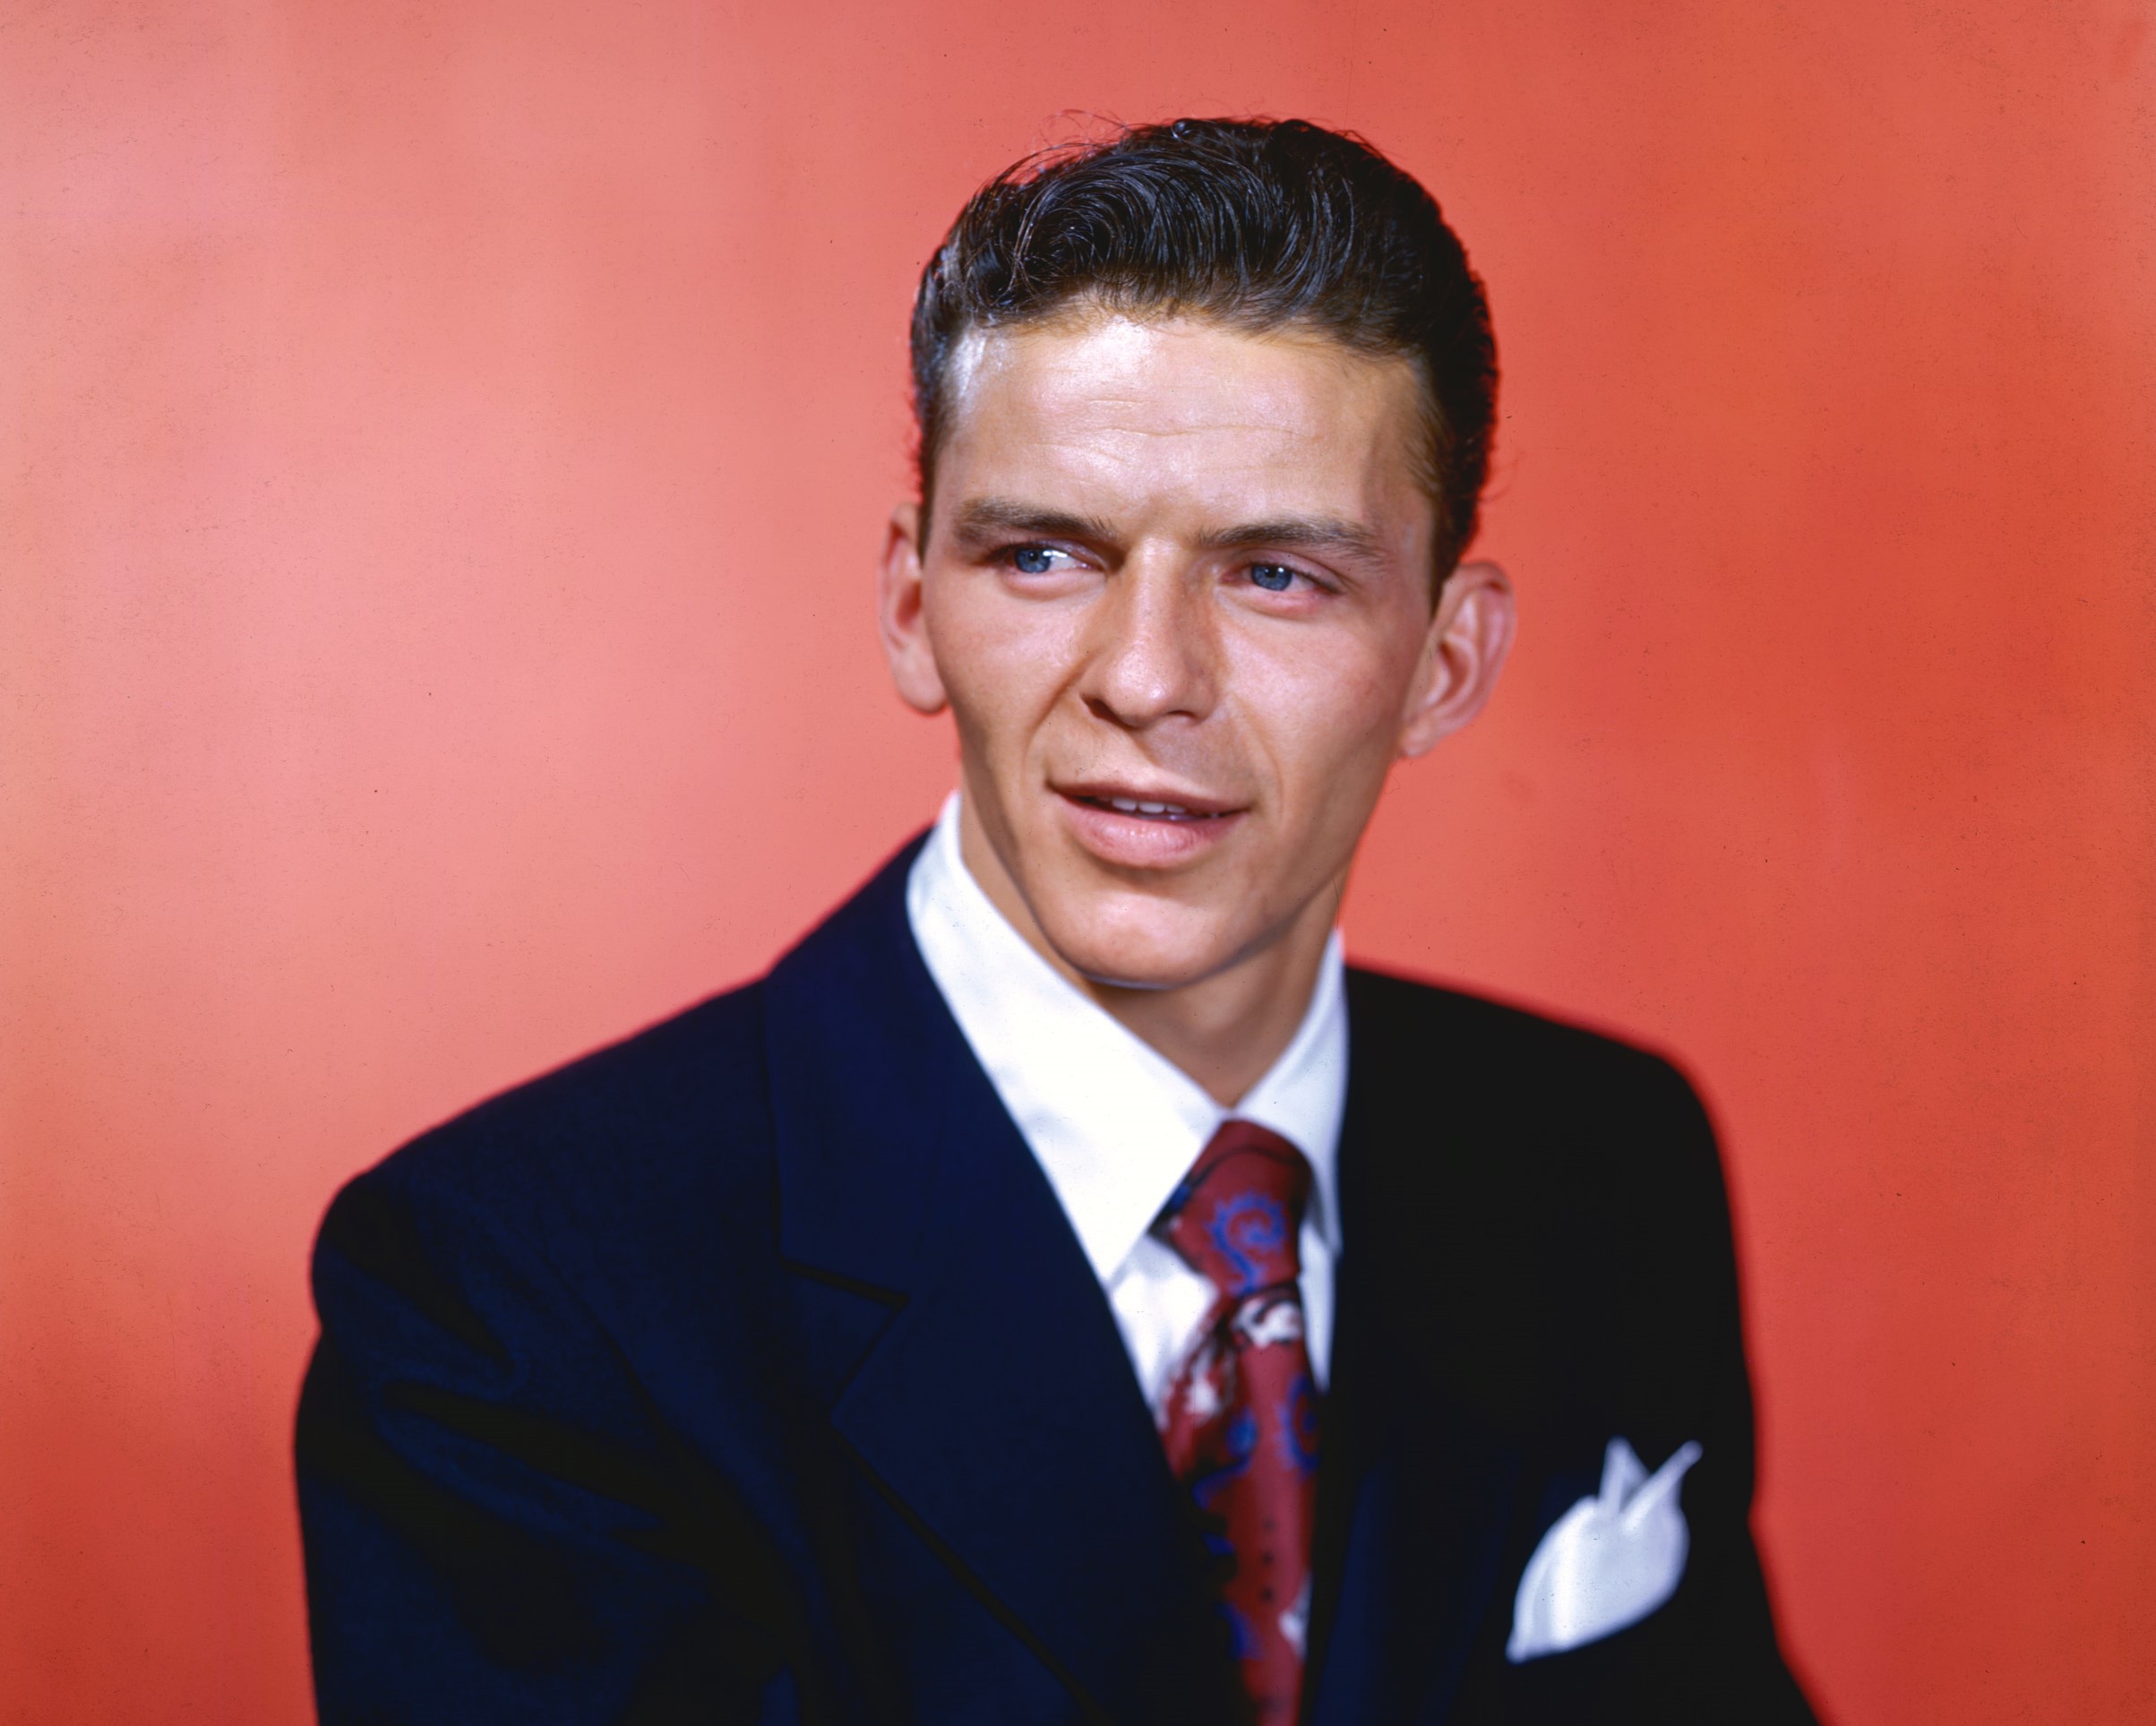 Frank Sinatra wears a suit and sits in front of a red background.